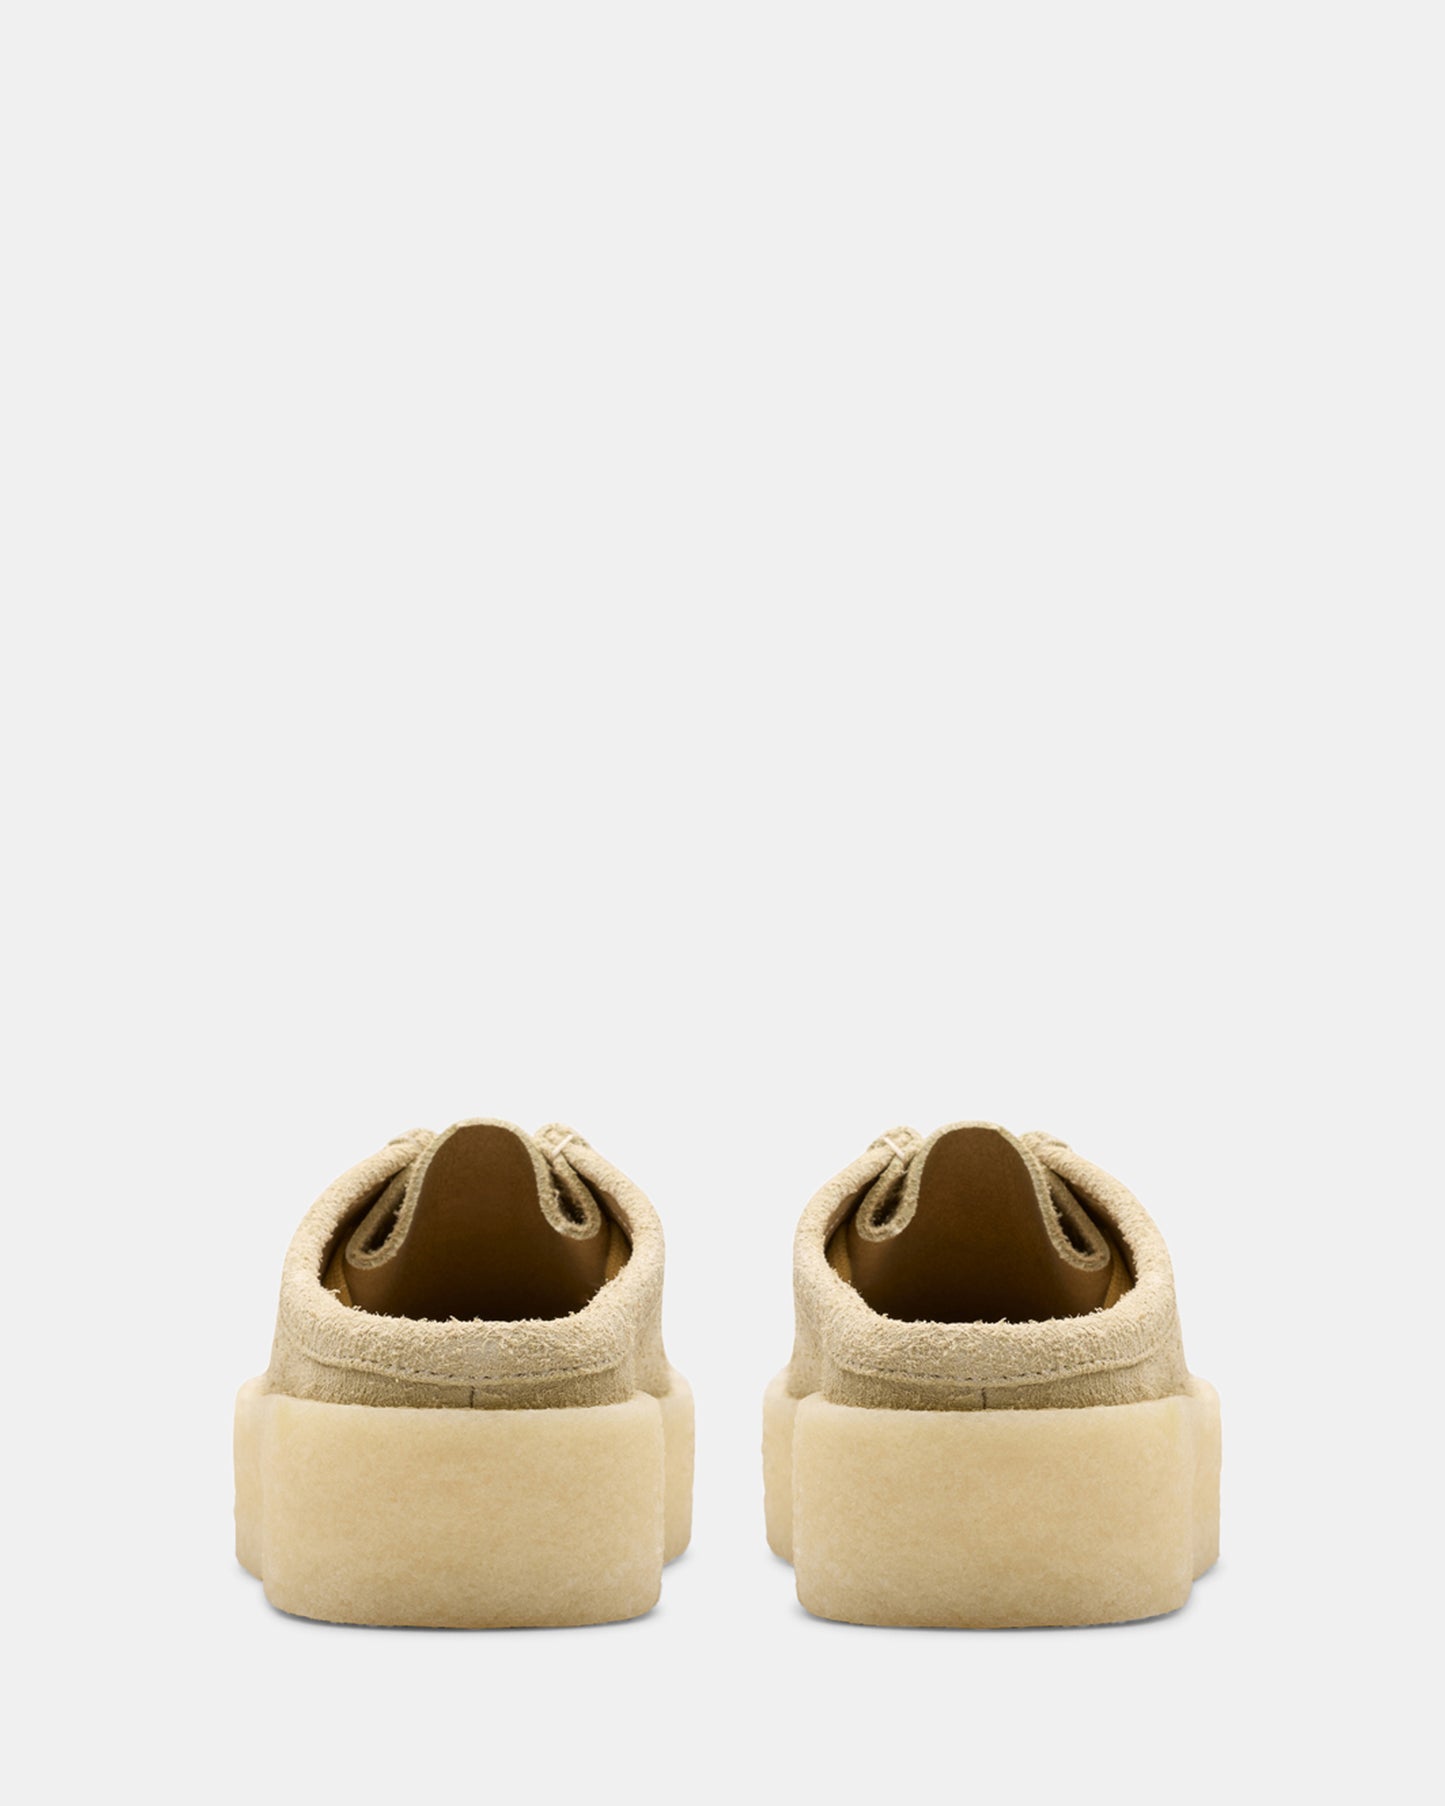 Wallabeecup Lo (W) Maple Hairy Suede